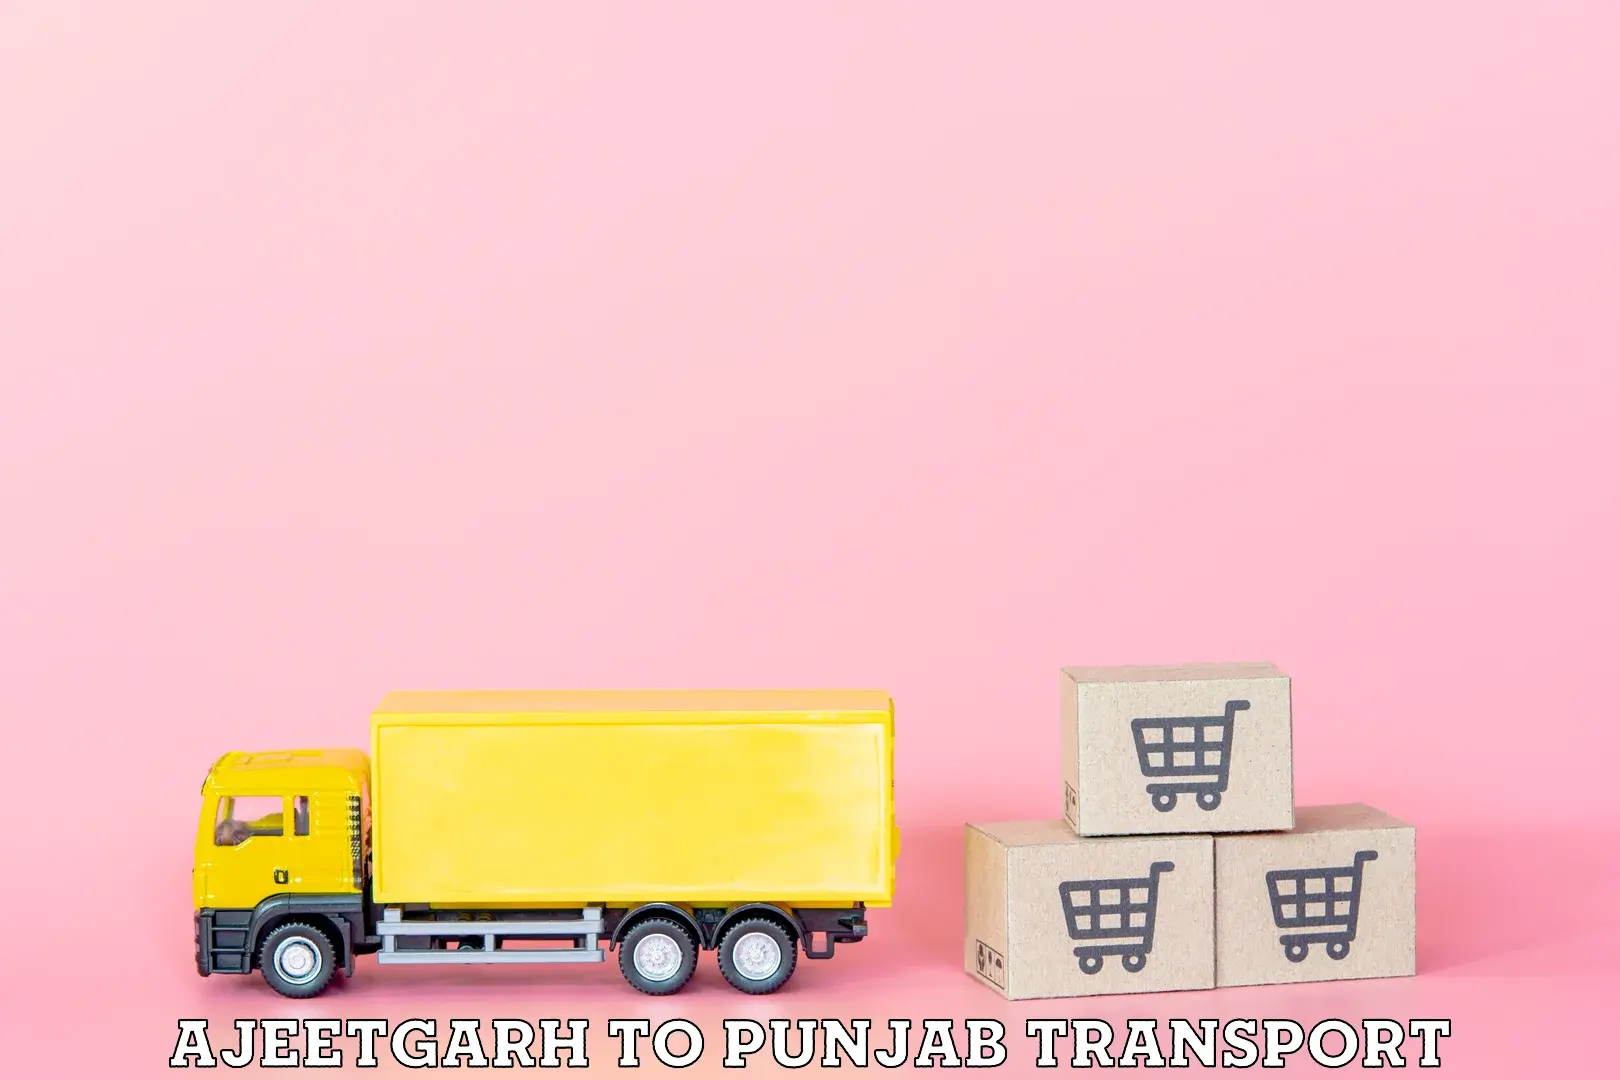 Container transport service Ajeetgarh to Goindwal Sahib